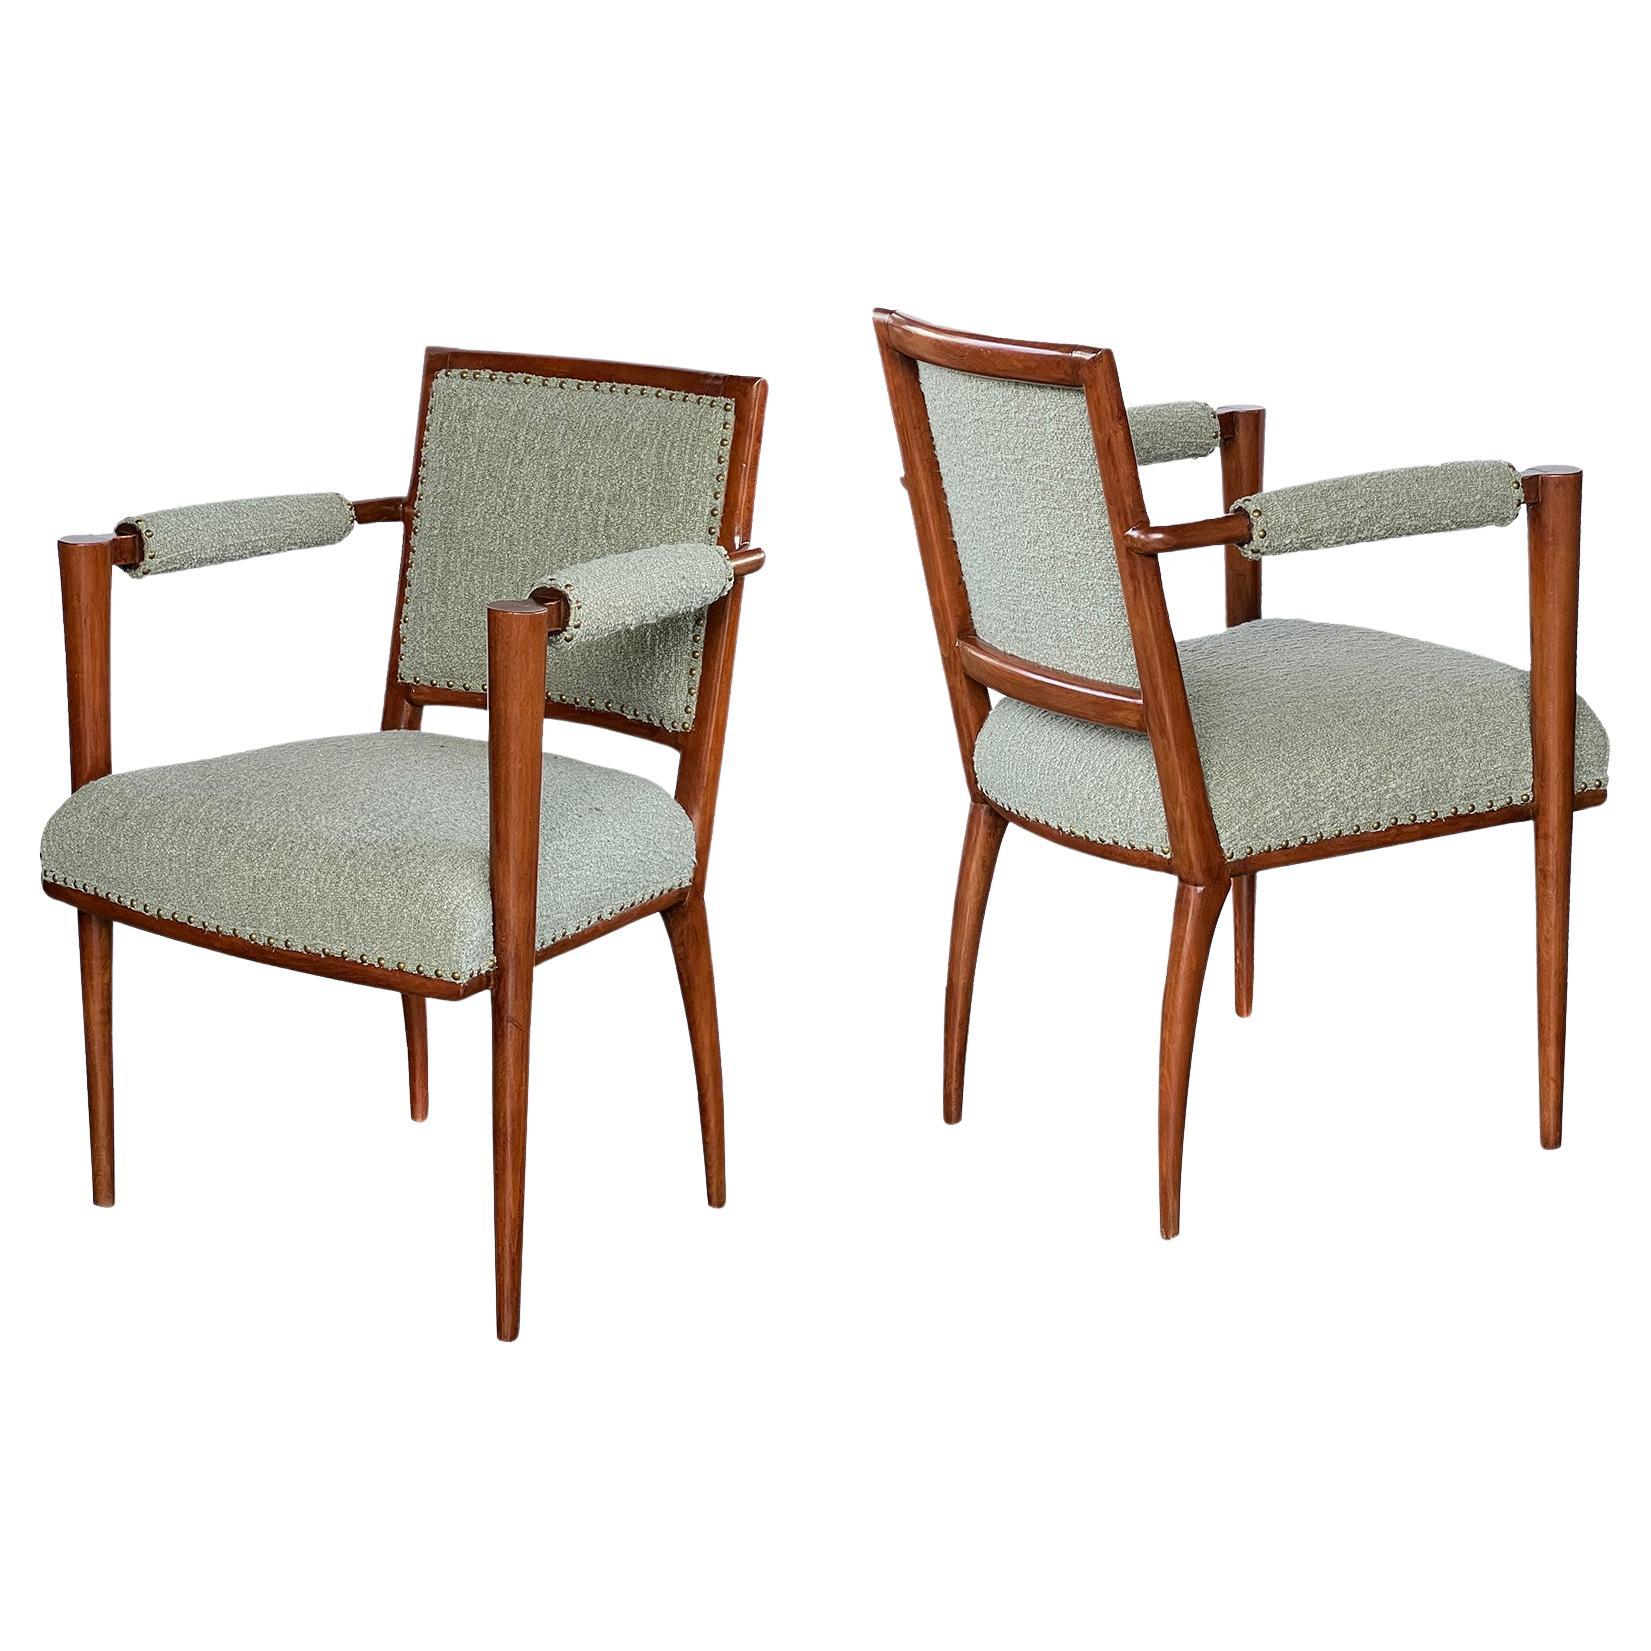 An Elegant Pair of French Art Deco Beechwood Arm Chairs For Sale